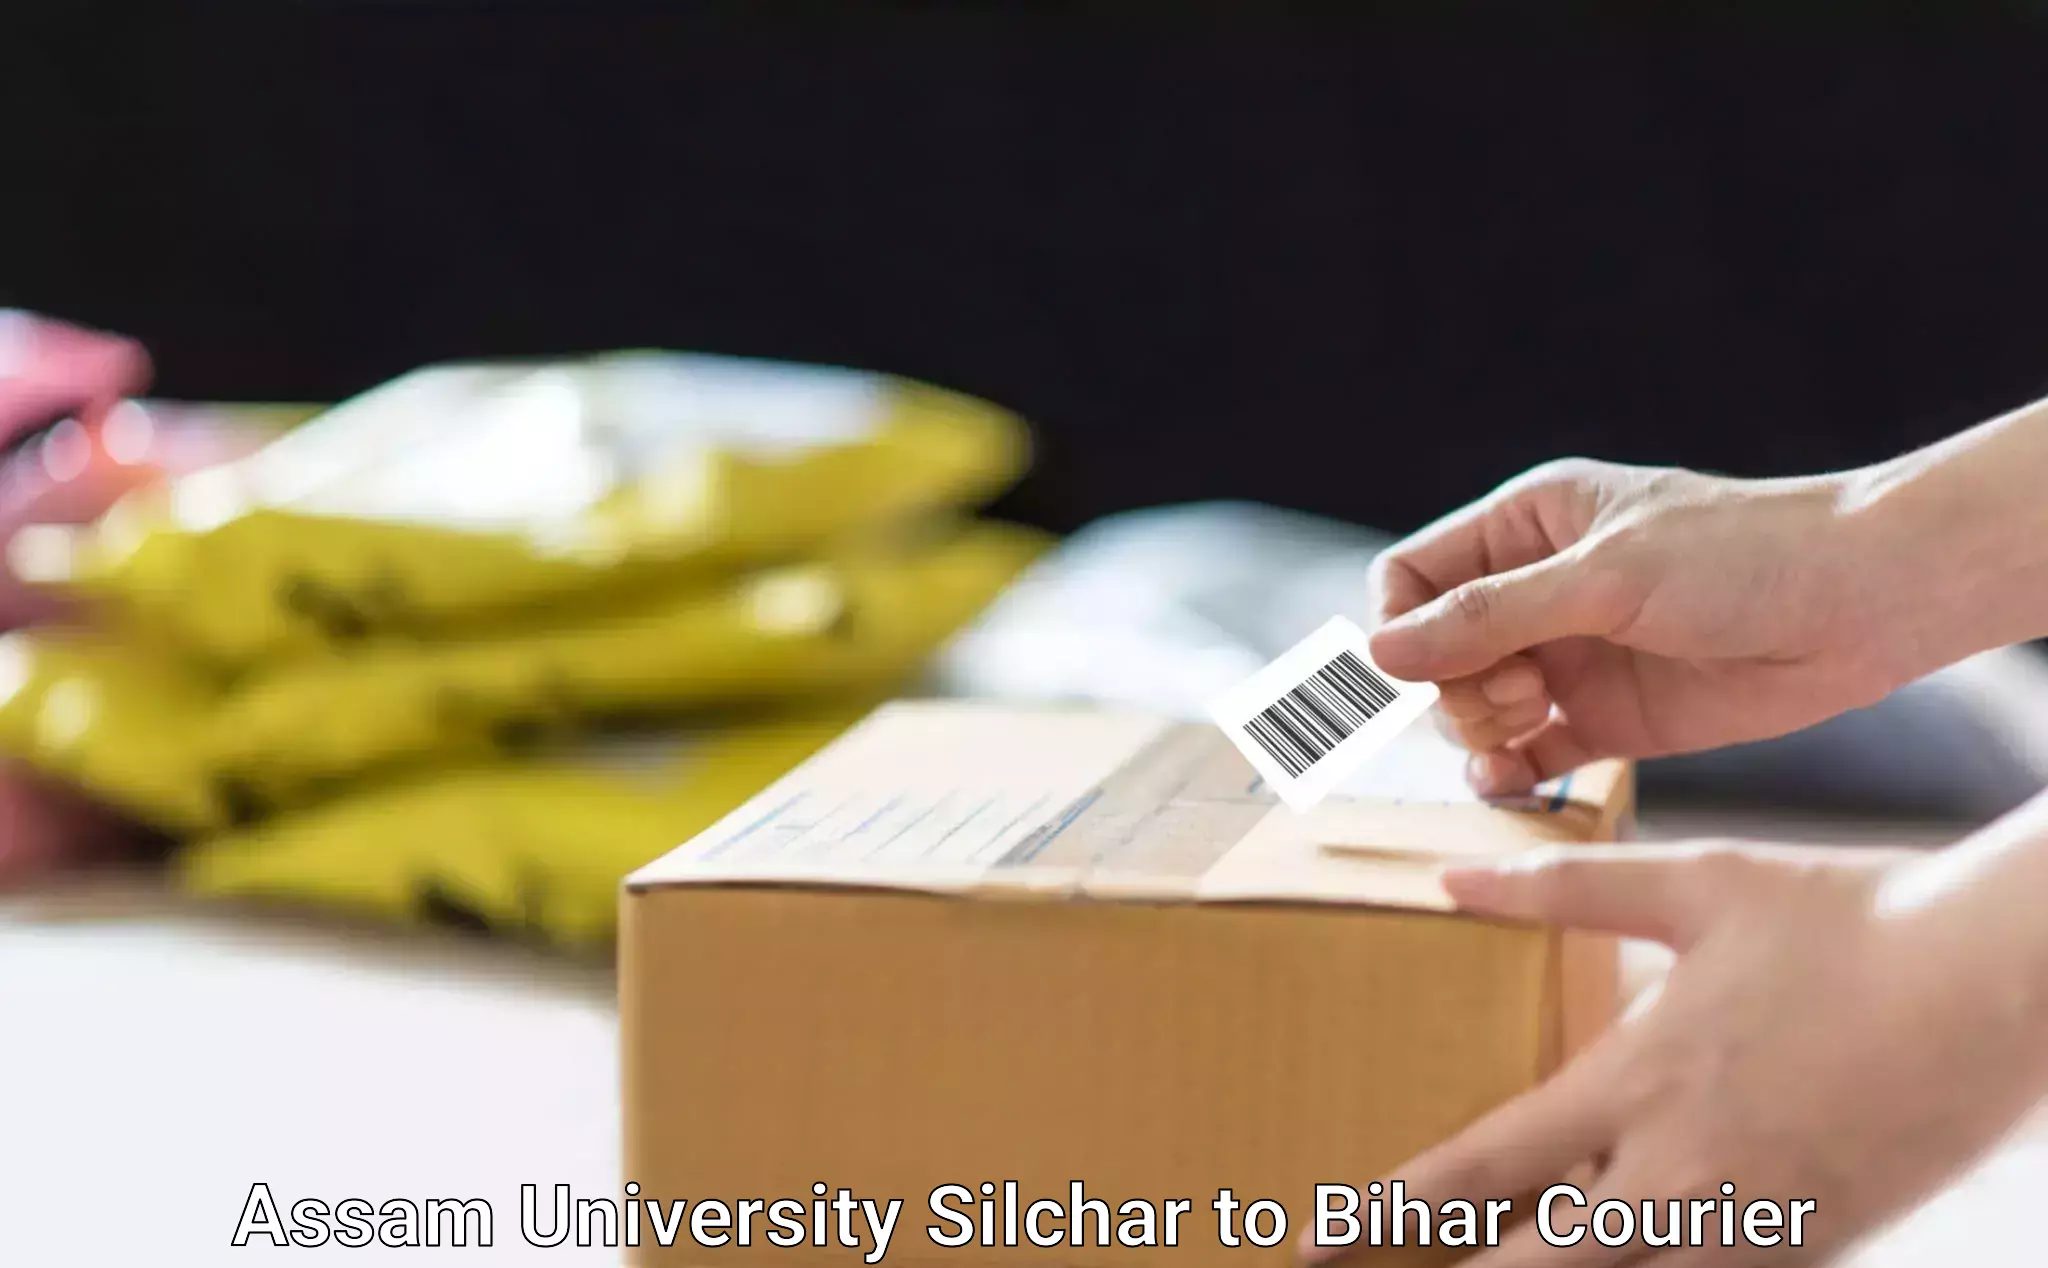 Large package courier Assam University Silchar to Lauria Nandangarh